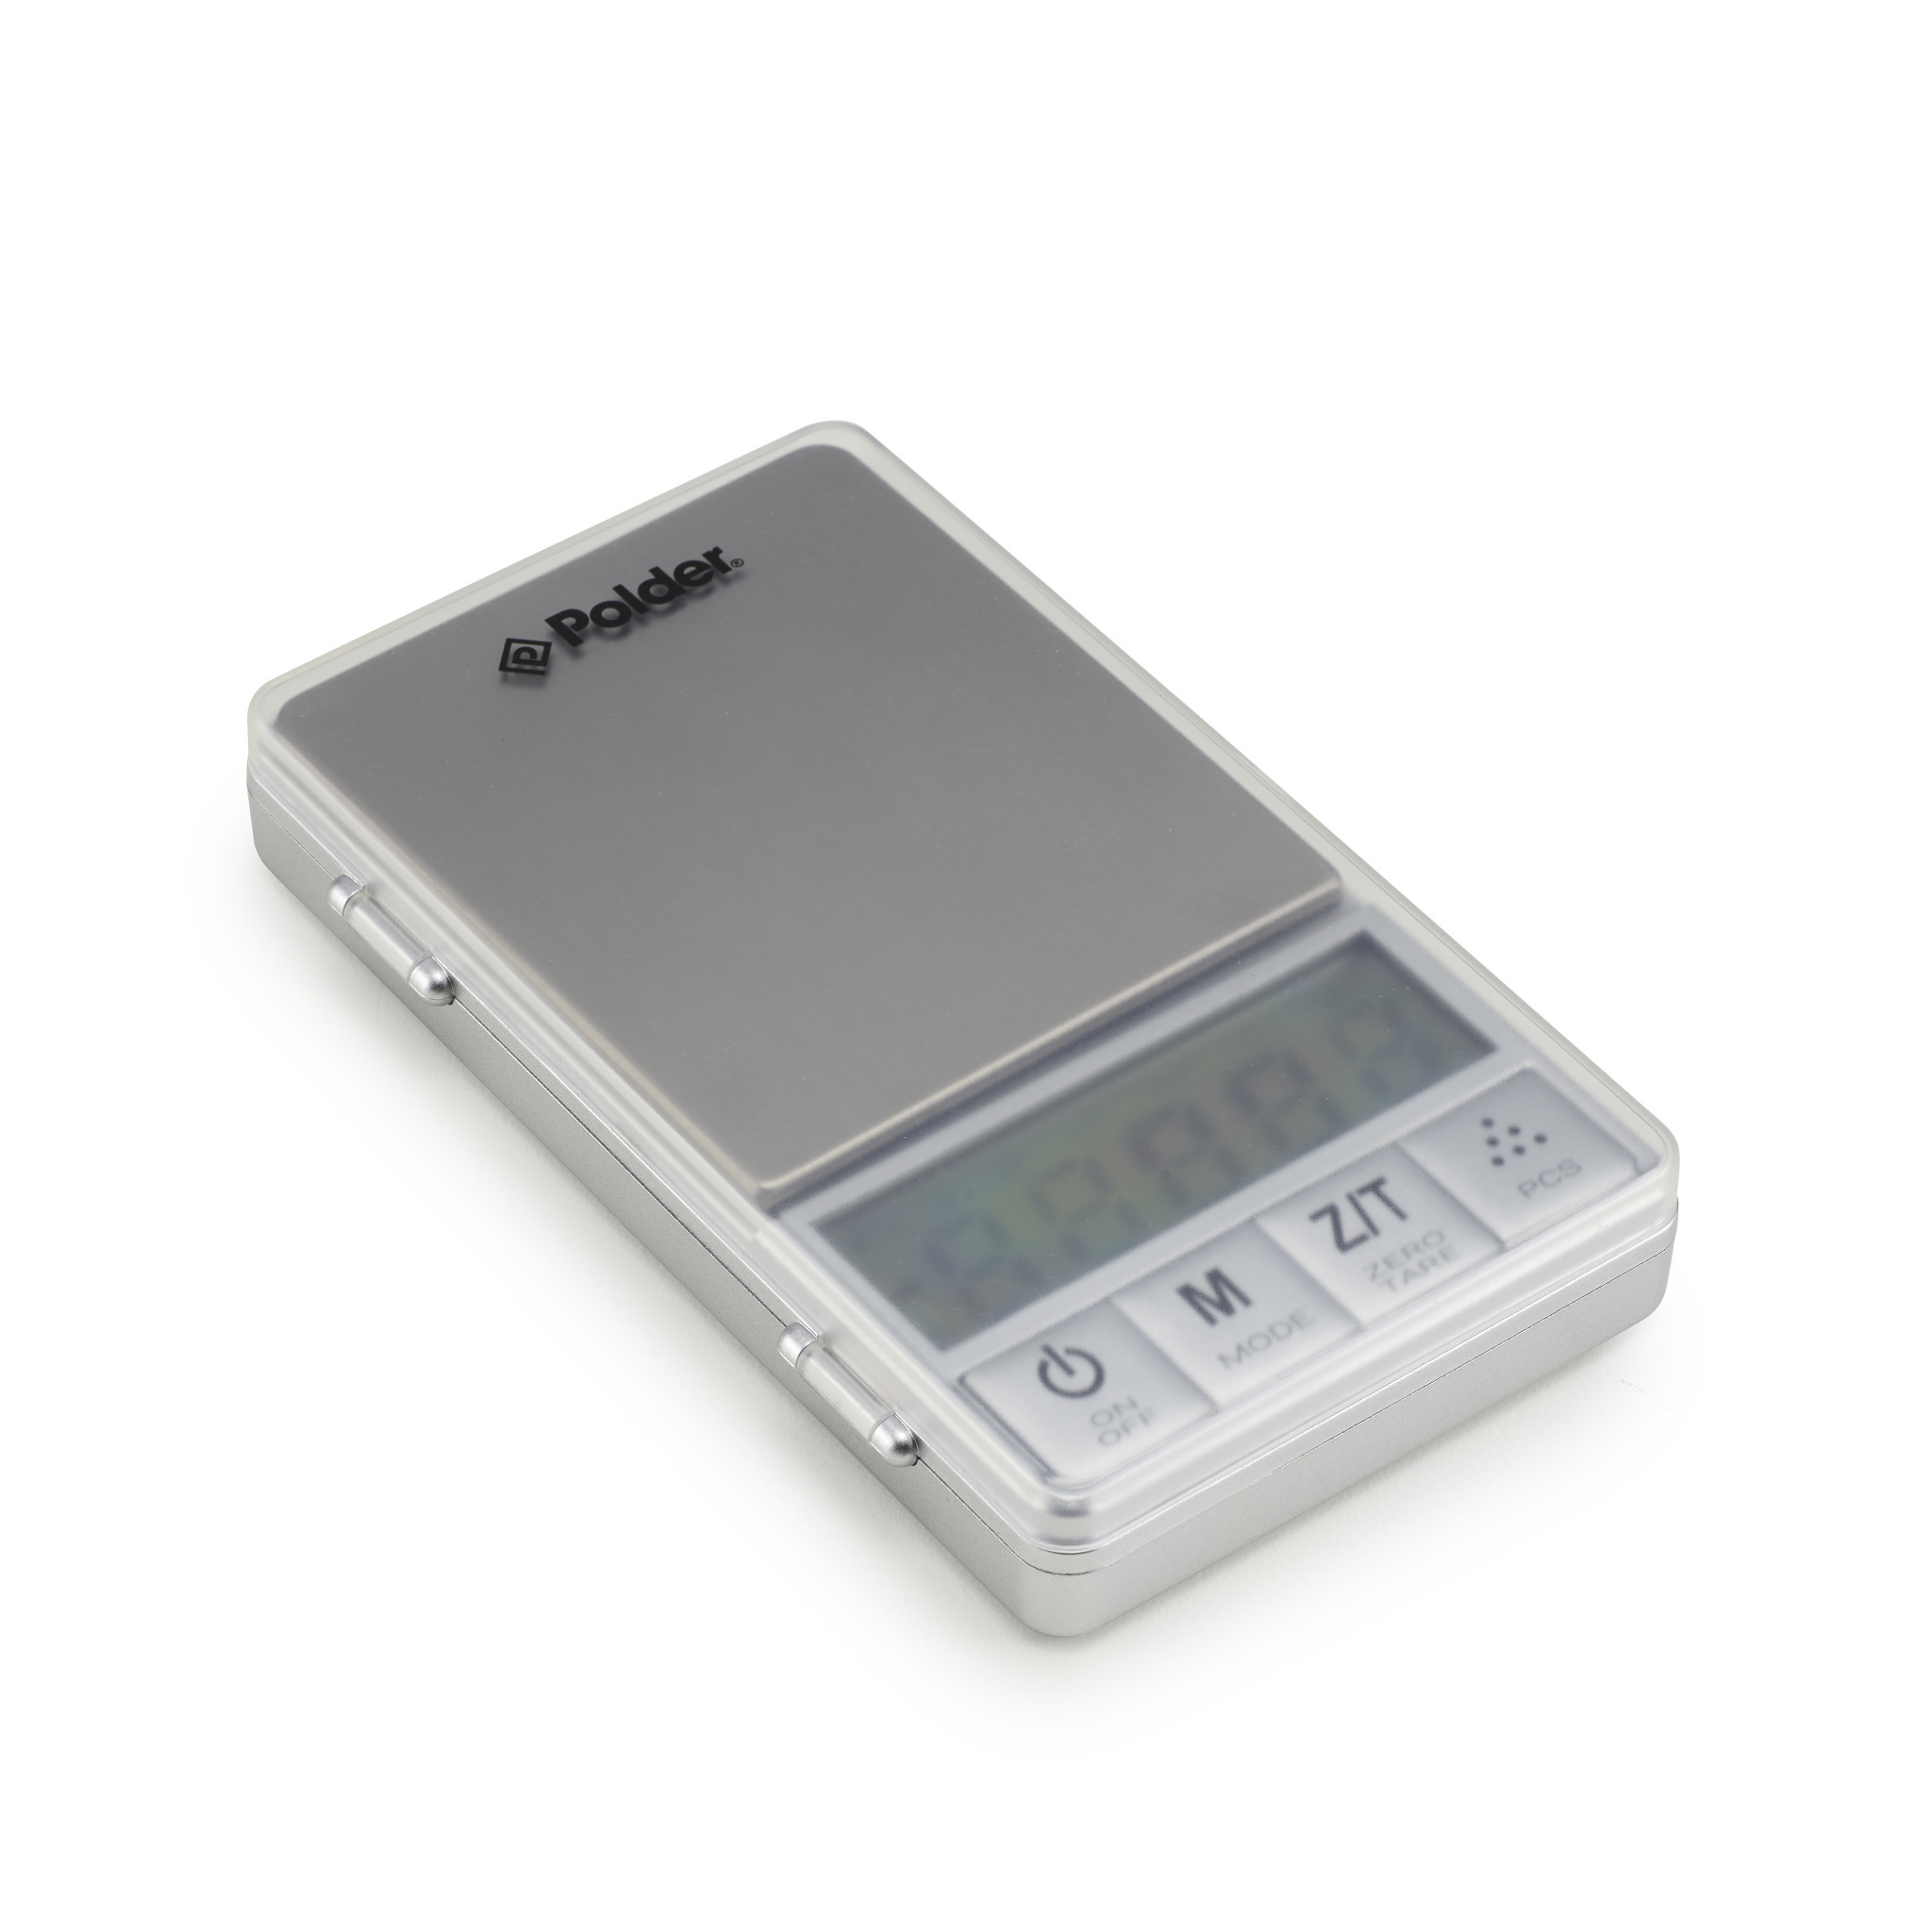 Polder Digital Kitchen Scale with Pull-Out Display